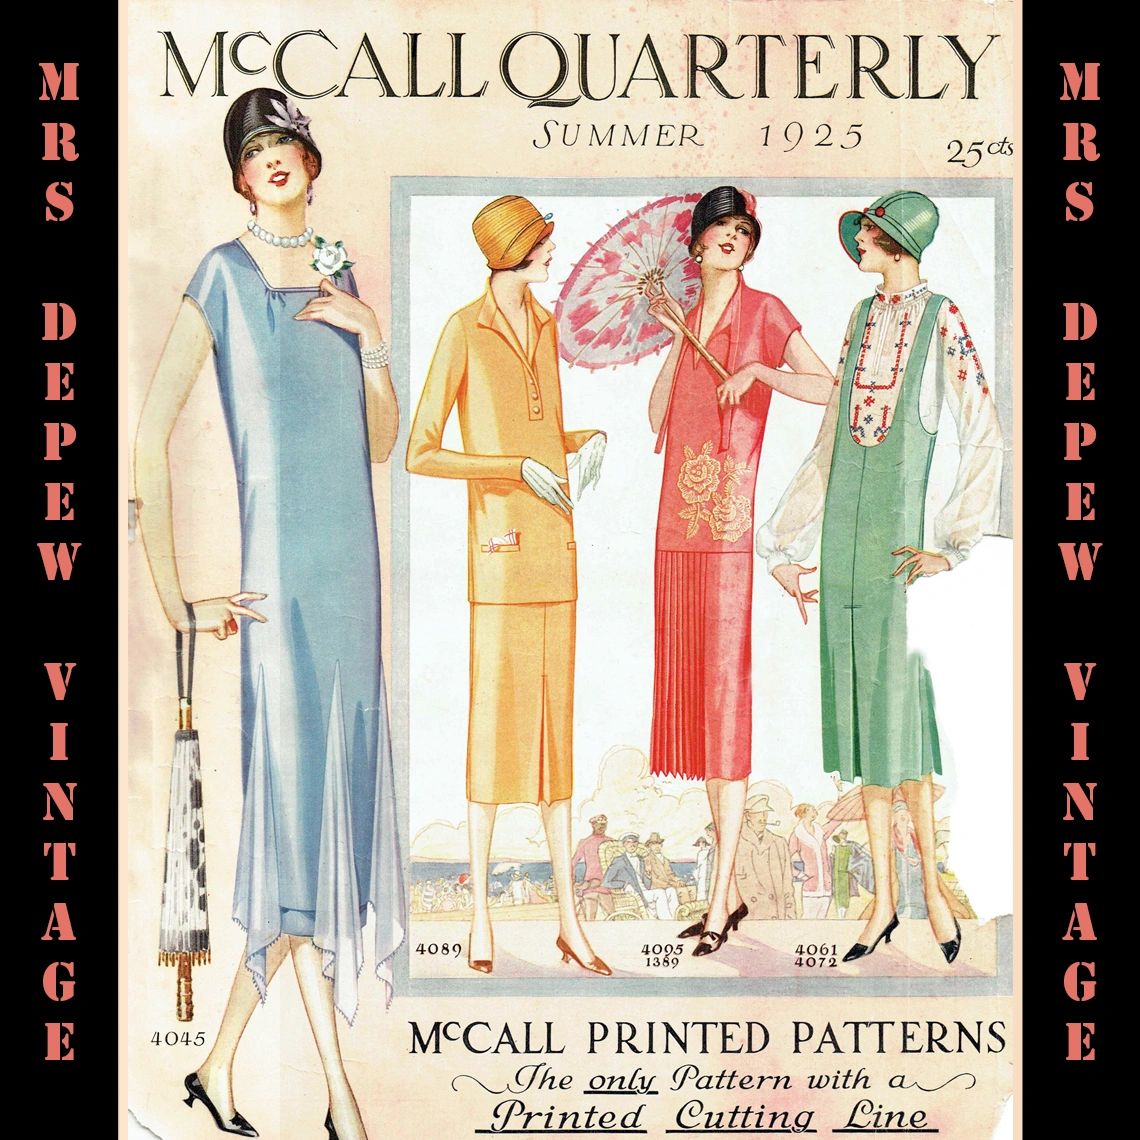 Vintage Sewing Pattern Catalog Booklet Mccall Quarterly Summer